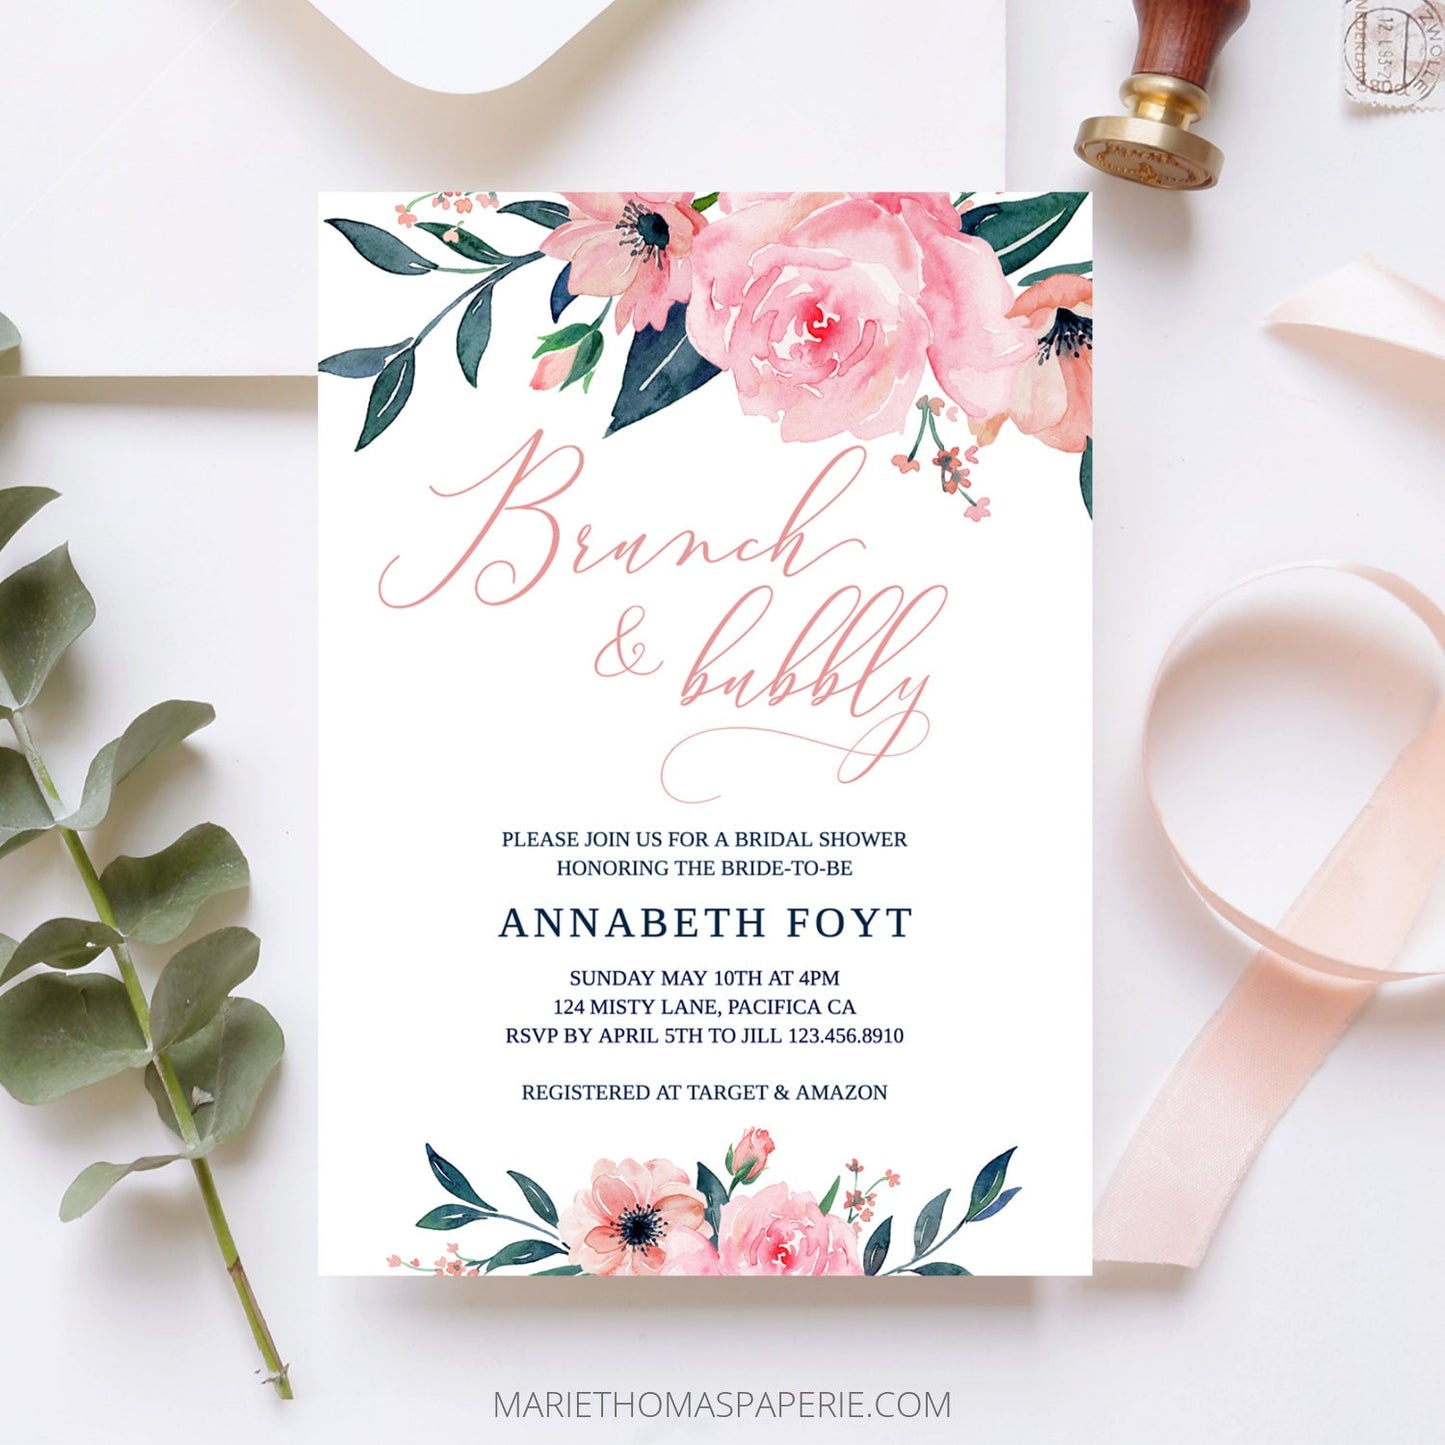 Editable Brunch and Bubbly Bridal Shower Invitation Pink & Navy Floral Boho Bridal Shower Invite Template